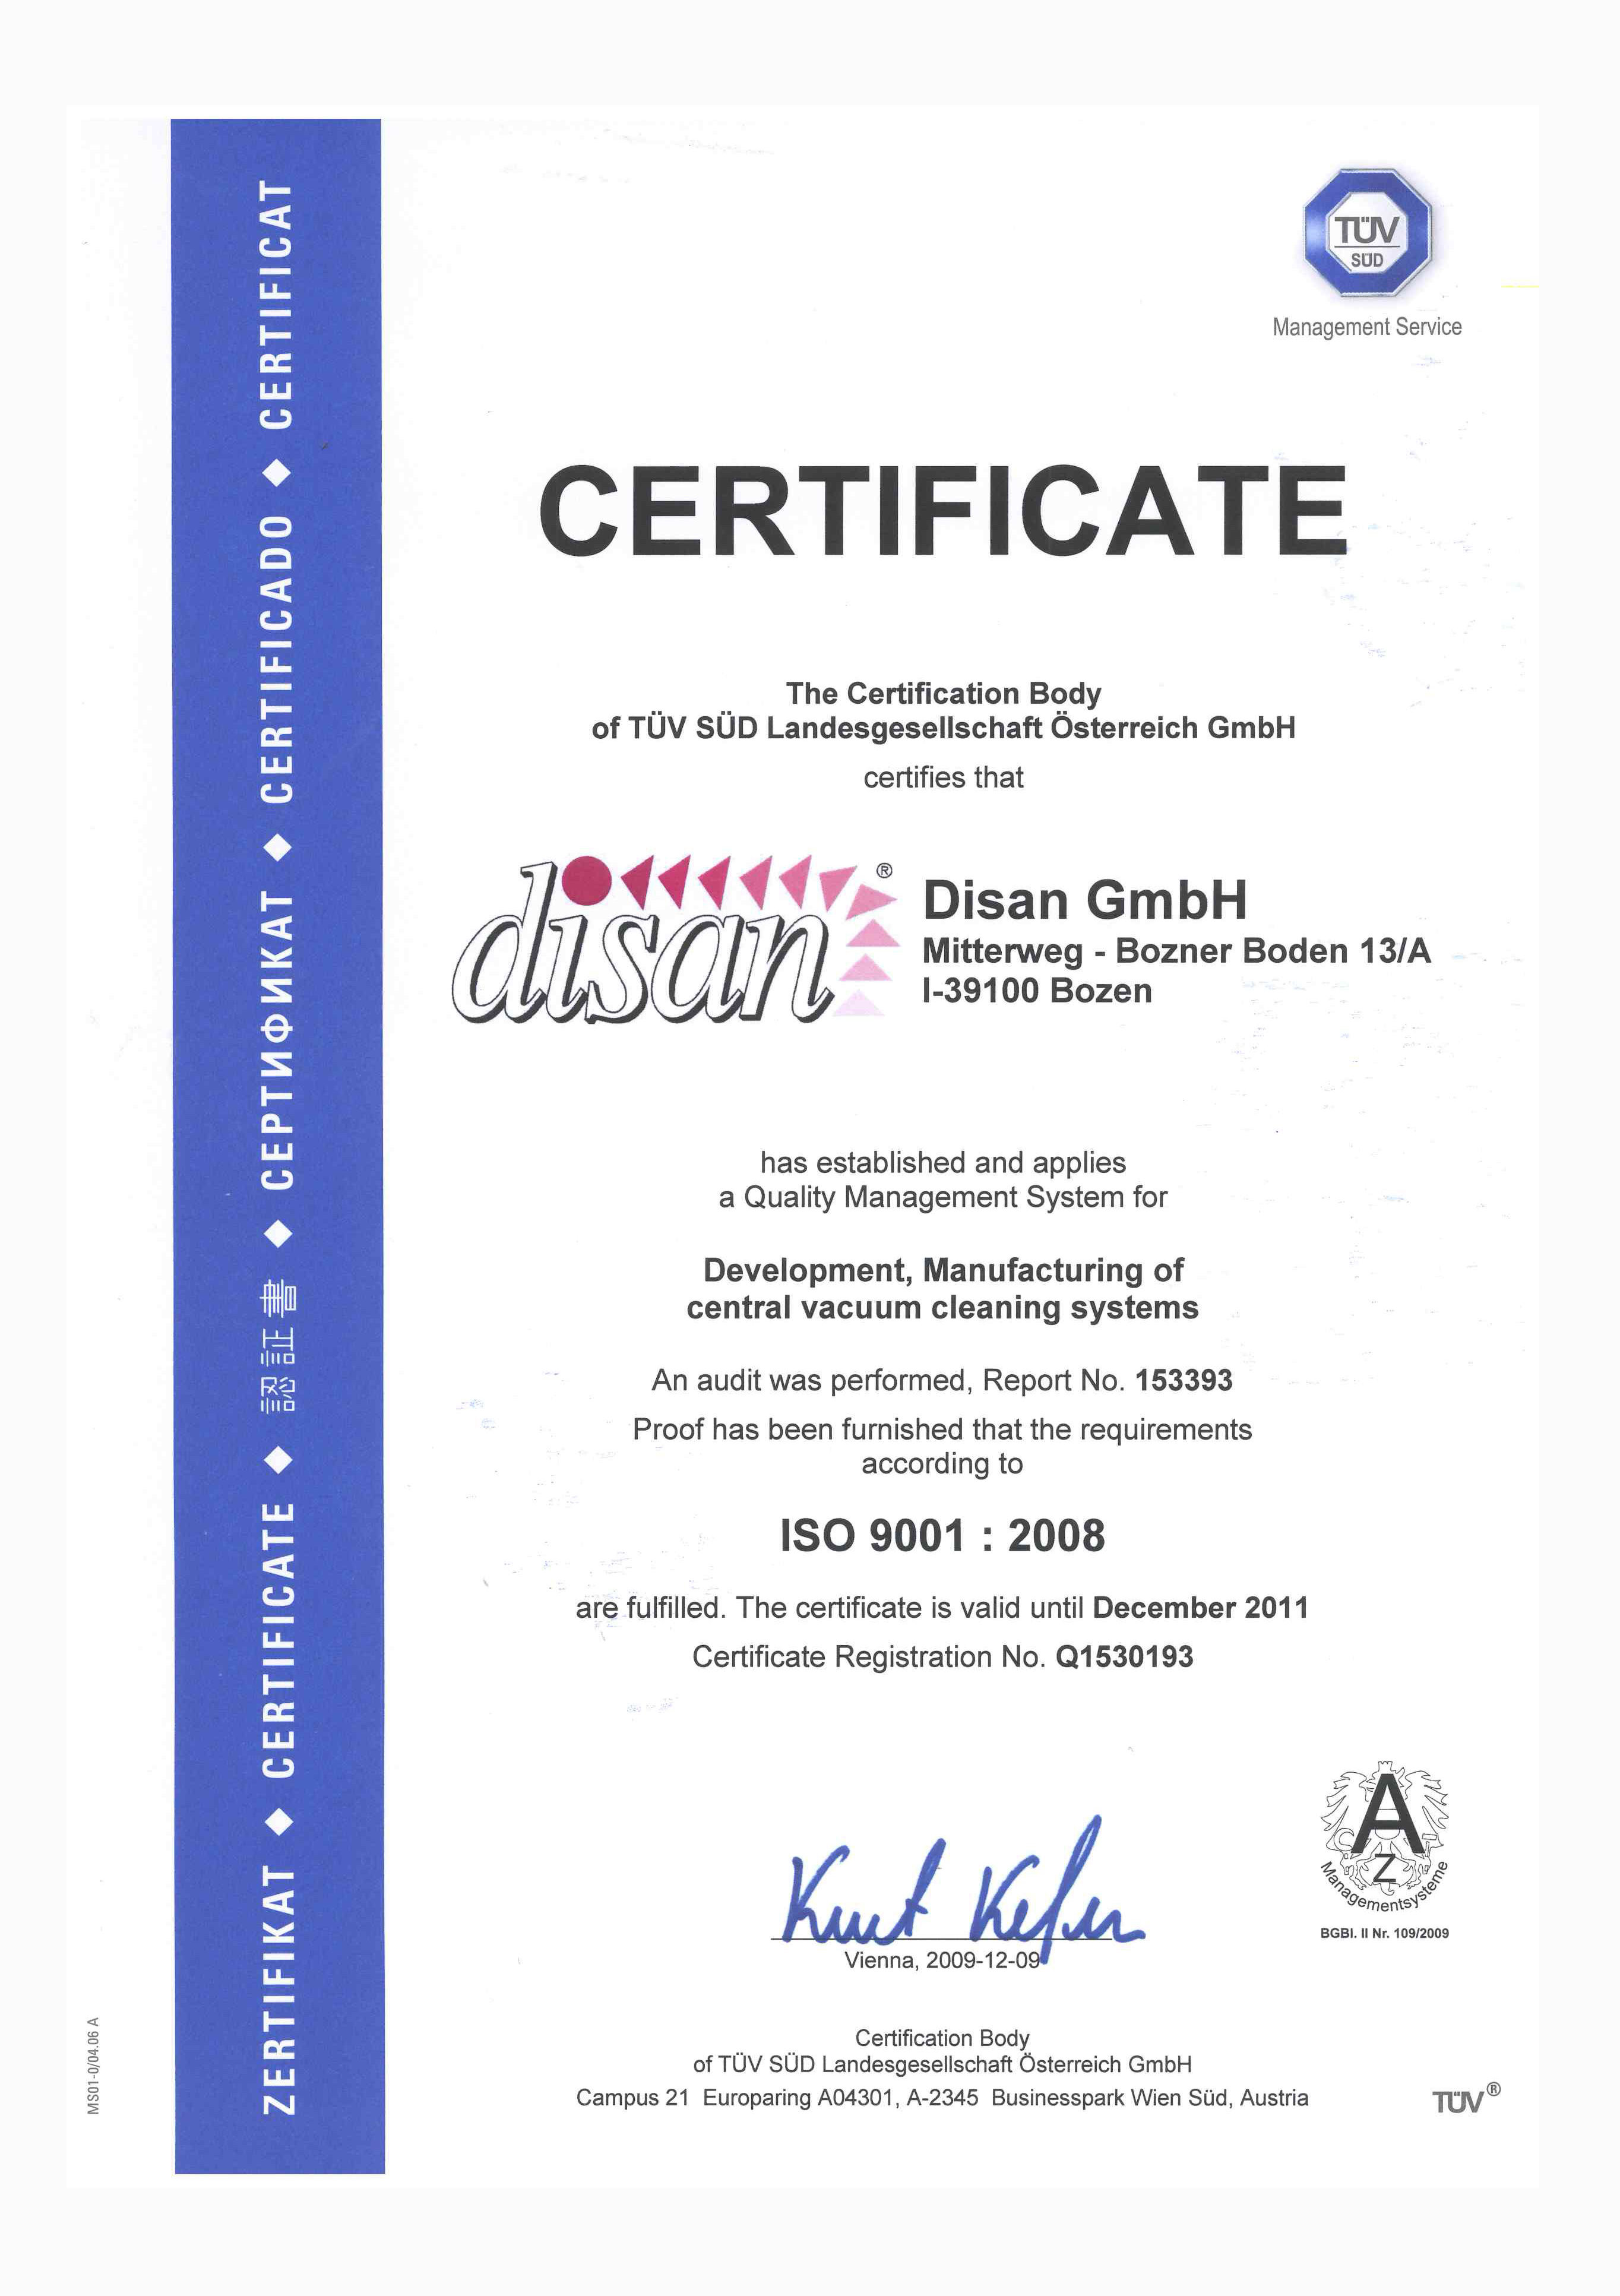 Certification ISO 9001/2008